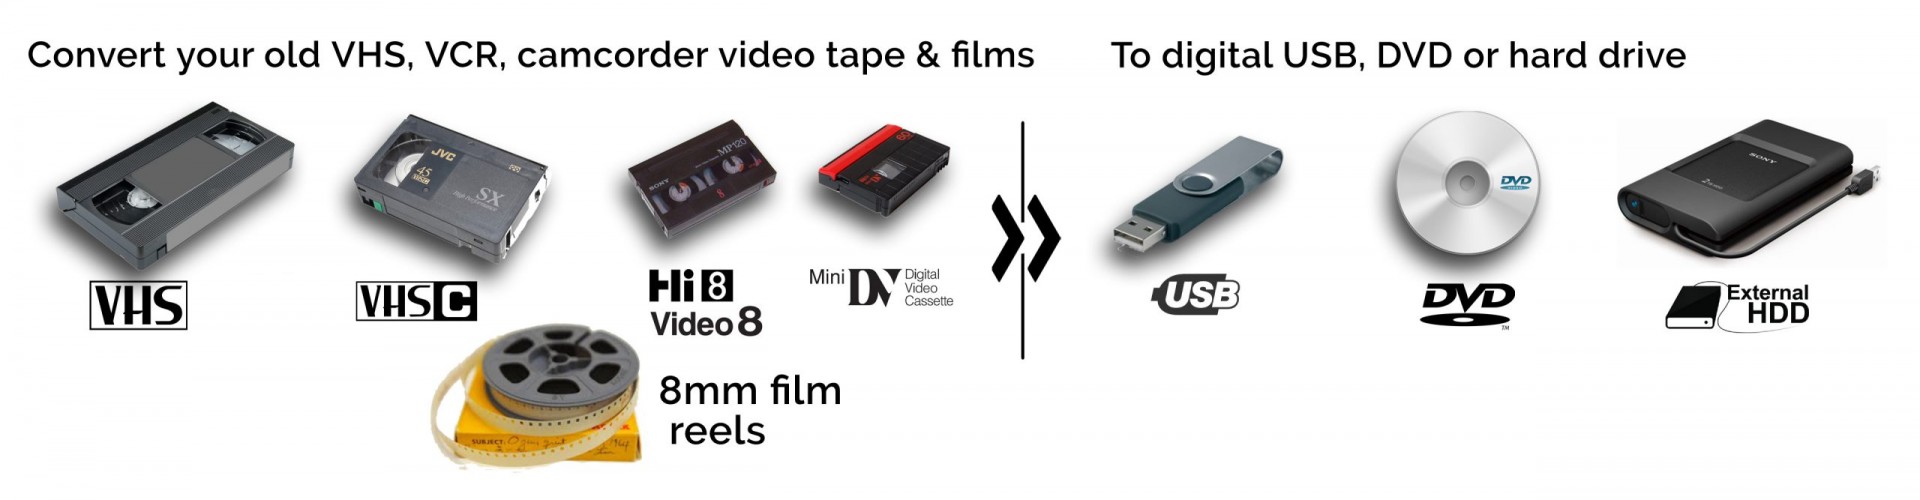 empezar Modales frío Convert Your Old VHS, VCR & Camcorder Video Tapes to Digital - Video  Essentials